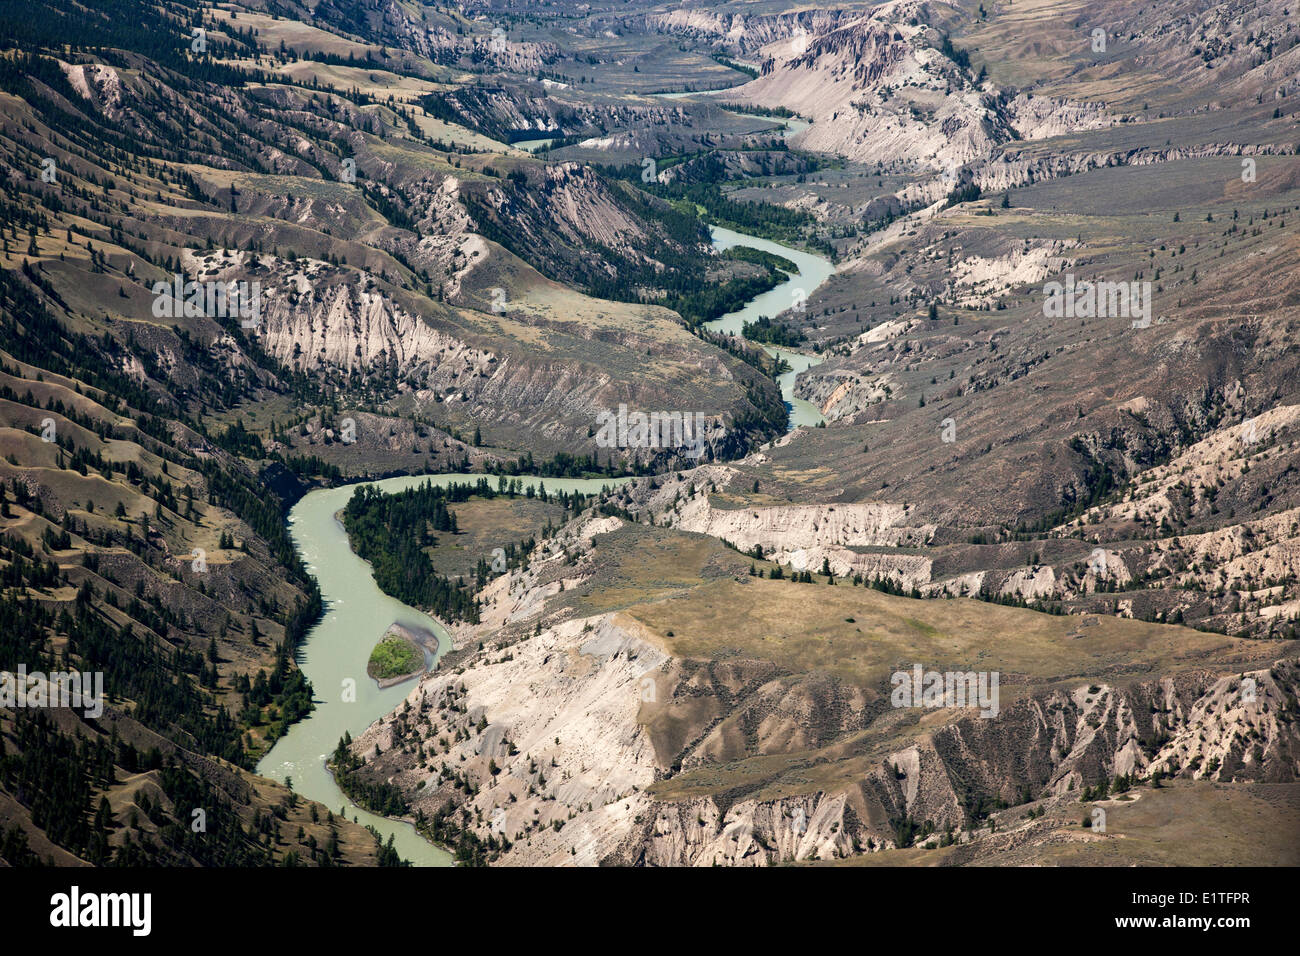 Aerial photography over the Chilcotin region of British Columbia Canada Stock Photo